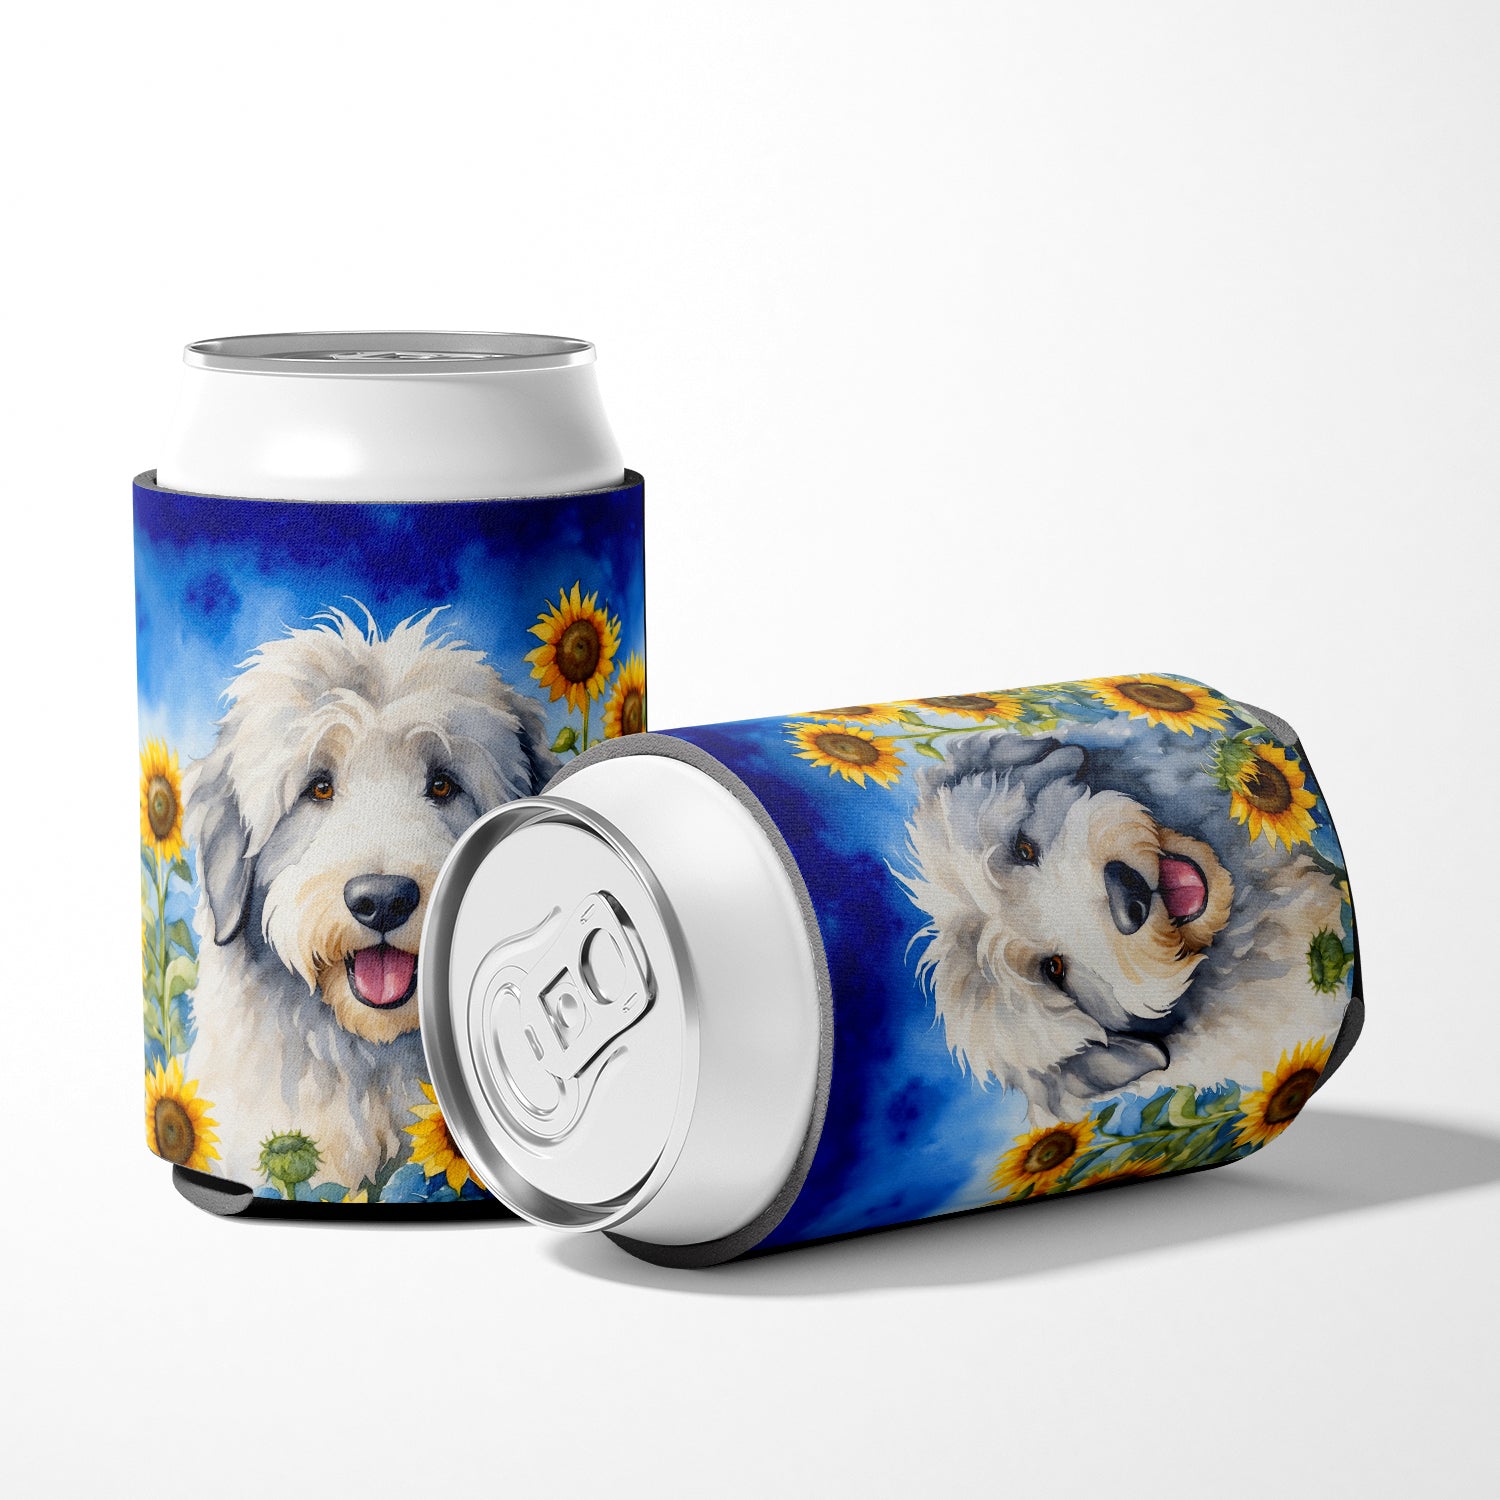 Old English Sheepdog in Sunflowers Can or Bottle Hugger